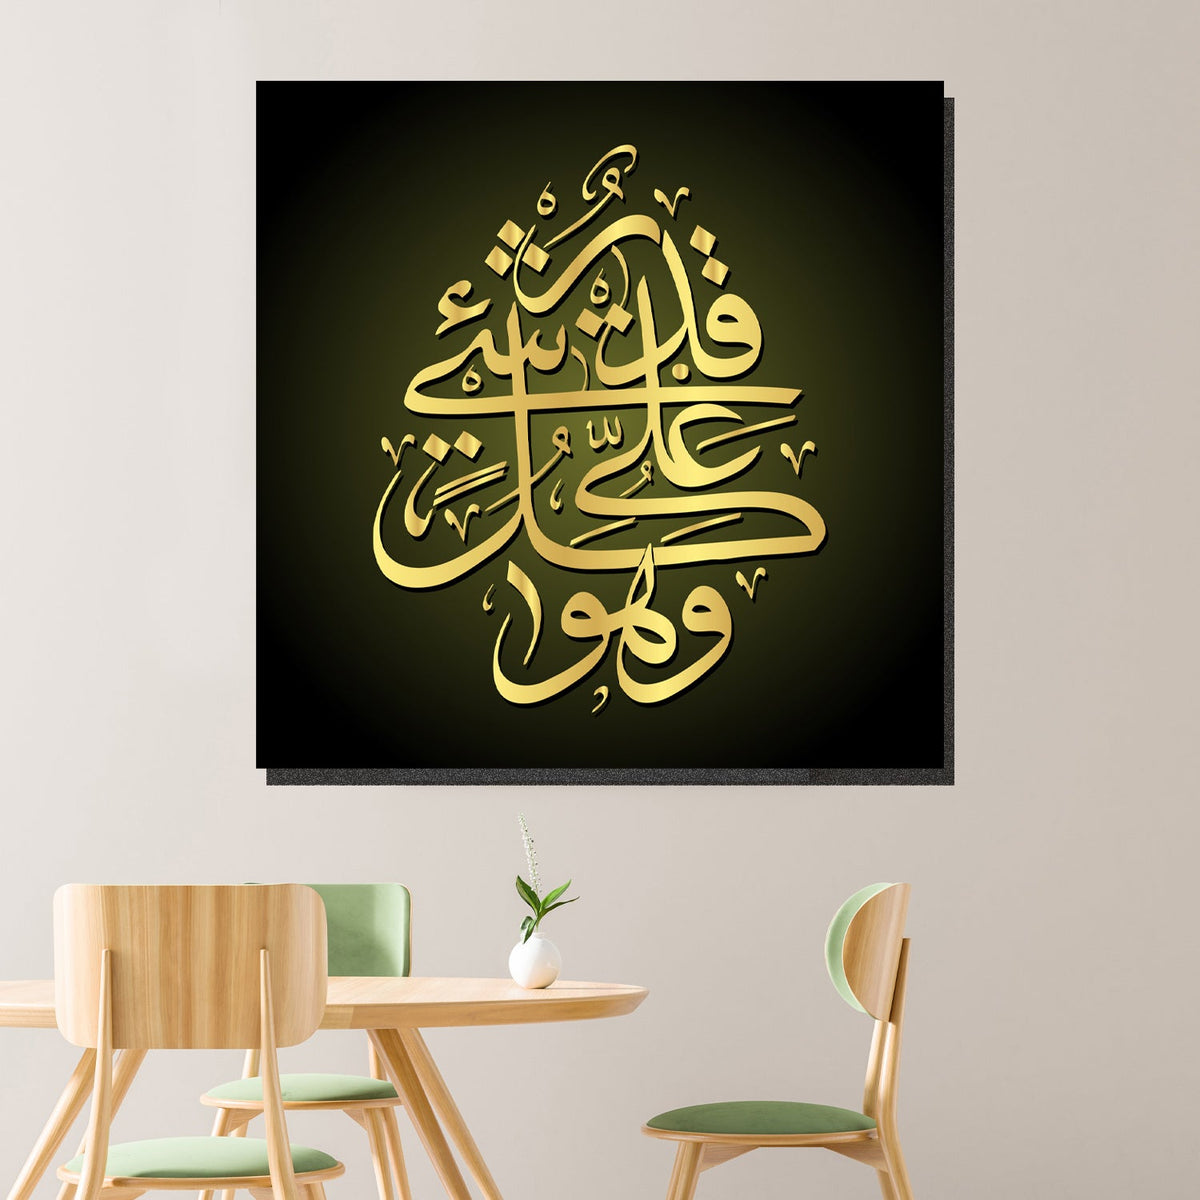 https://cdn.shopify.com/s/files/1/0387/9986/8044/products/IslamicArtLimitedEdition17CanvasArtprintStretched-1.jpg